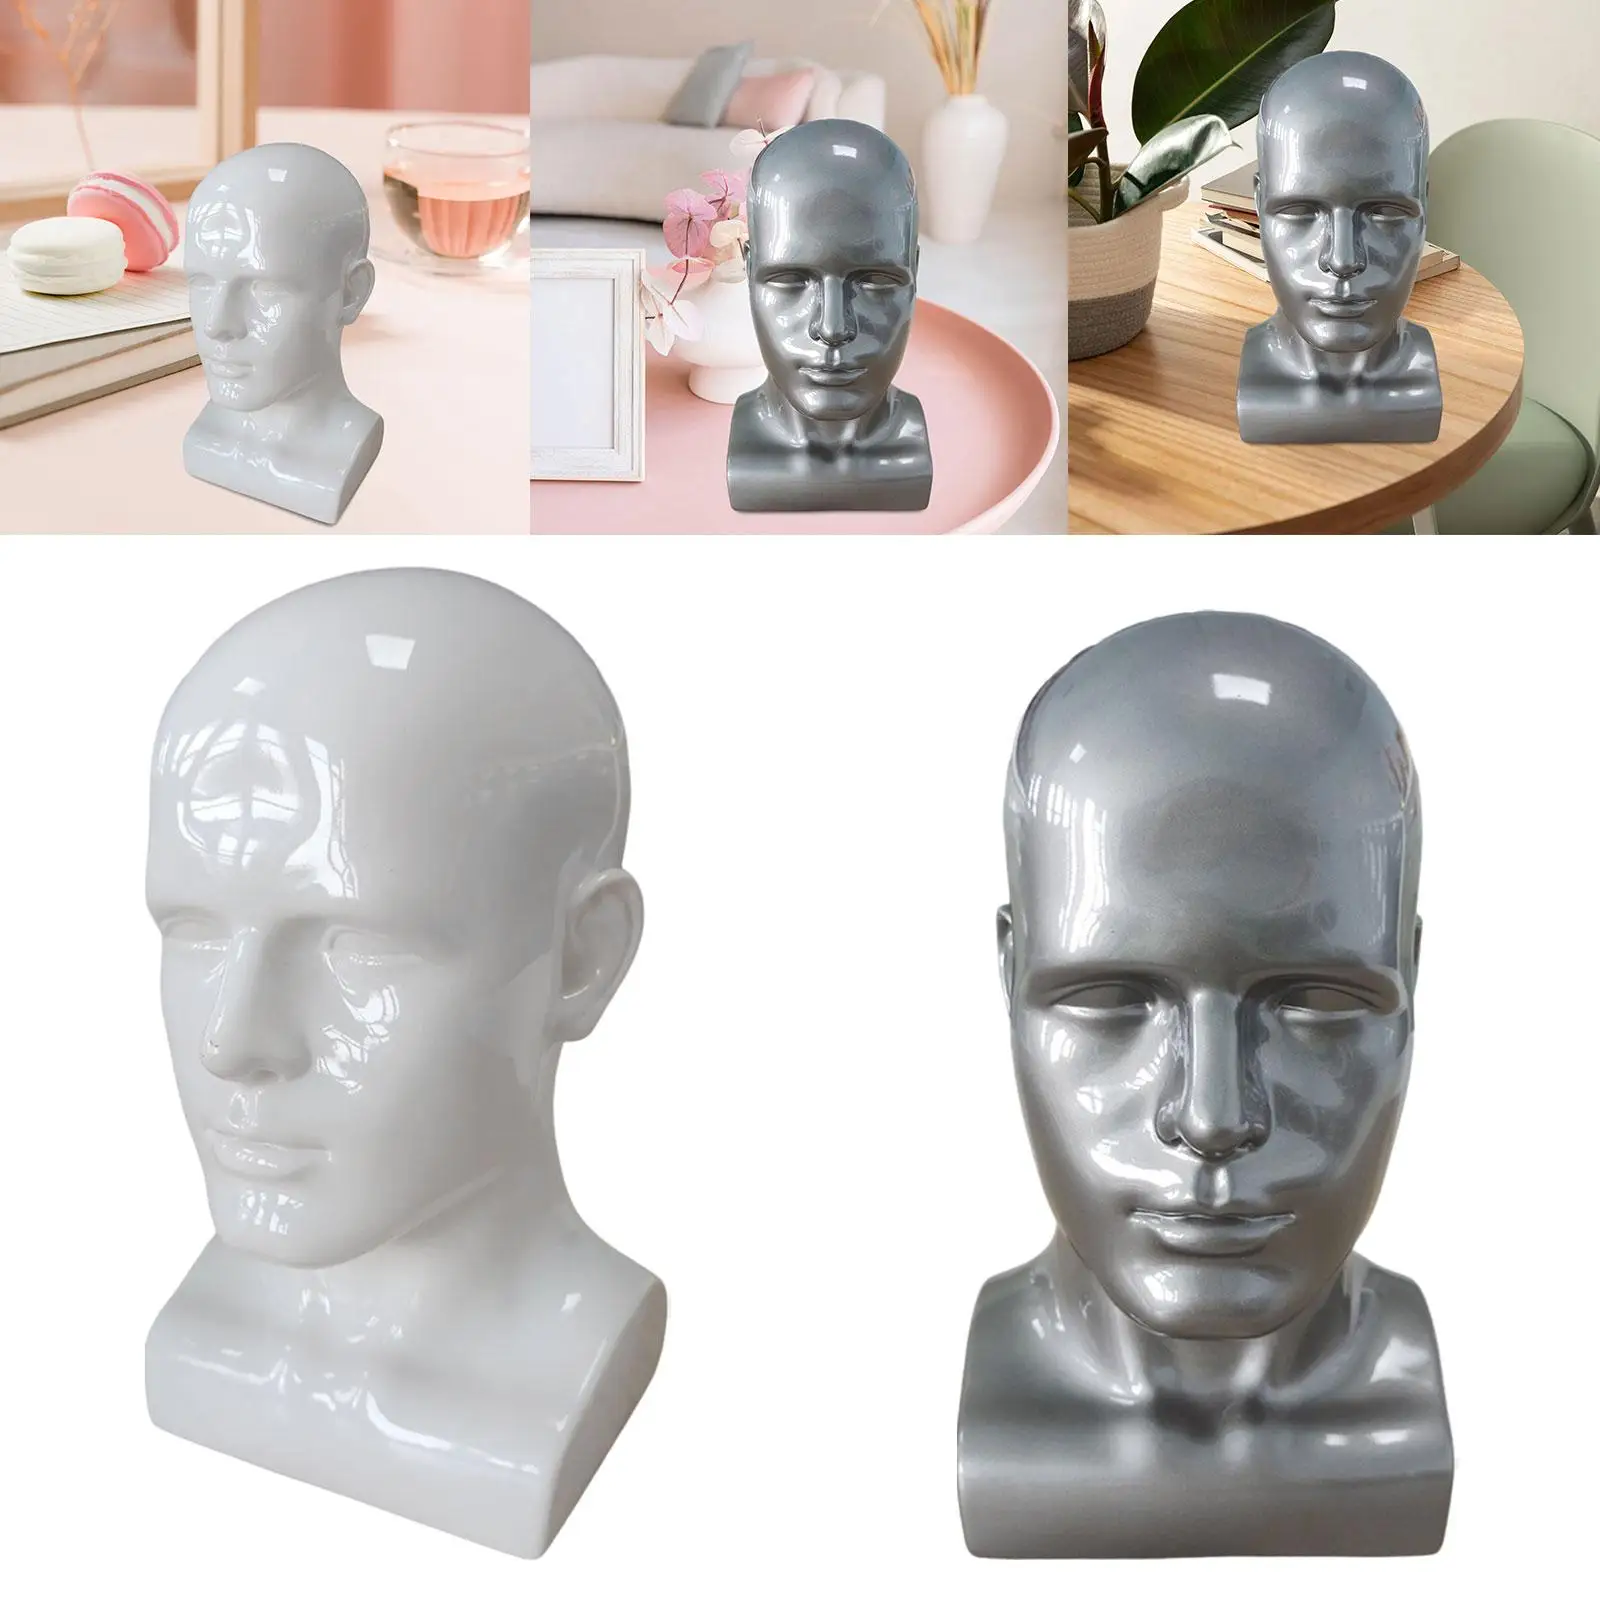 Men Mannequin Head PVC Display Styling Tool Accessories for Hat Scarf 13.4inch Tall Sturdy